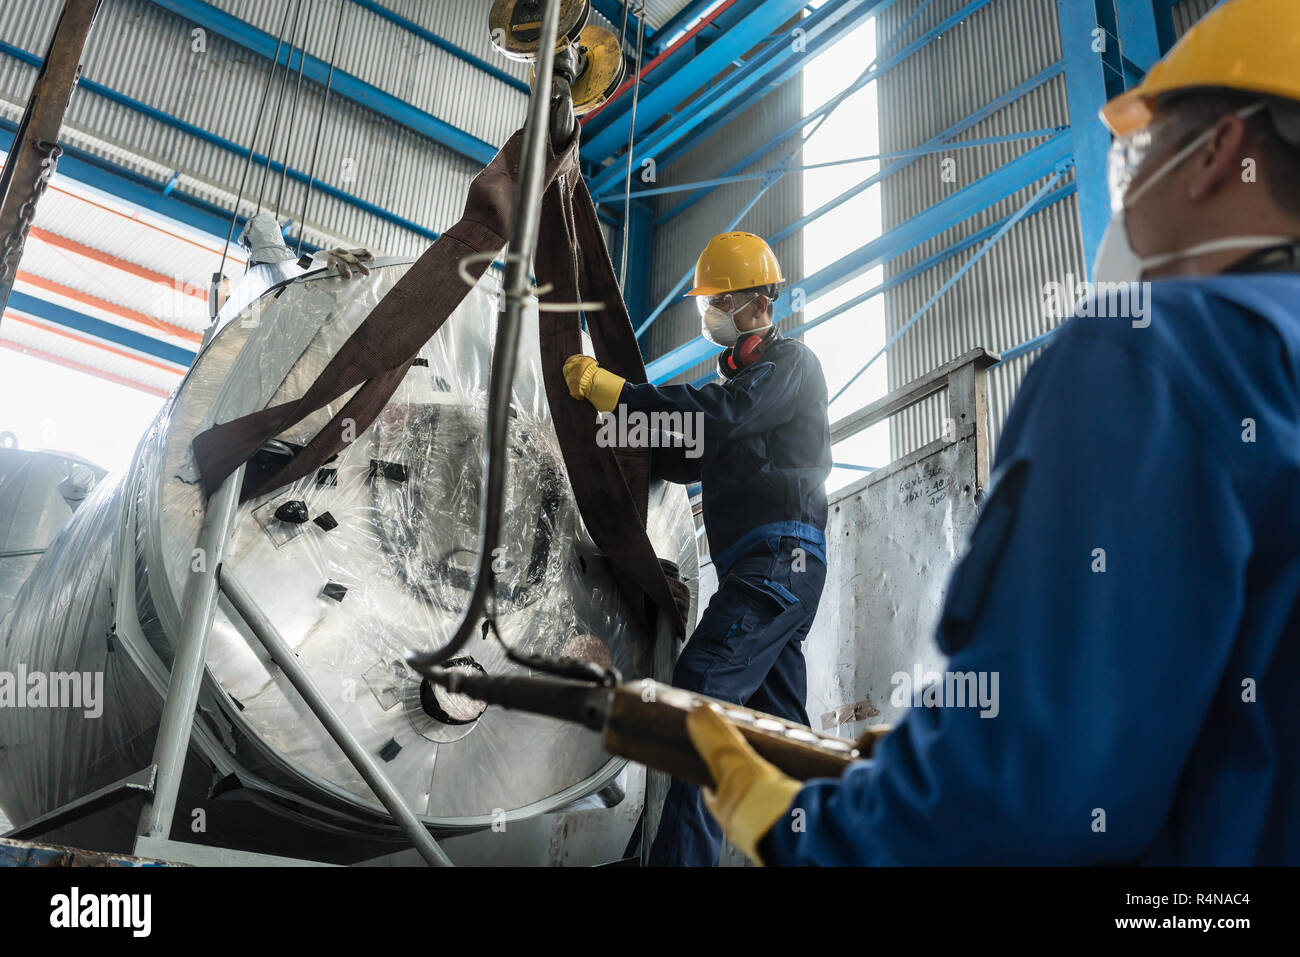 Workers handling equipment for lifting industrial boilers Stock Photo